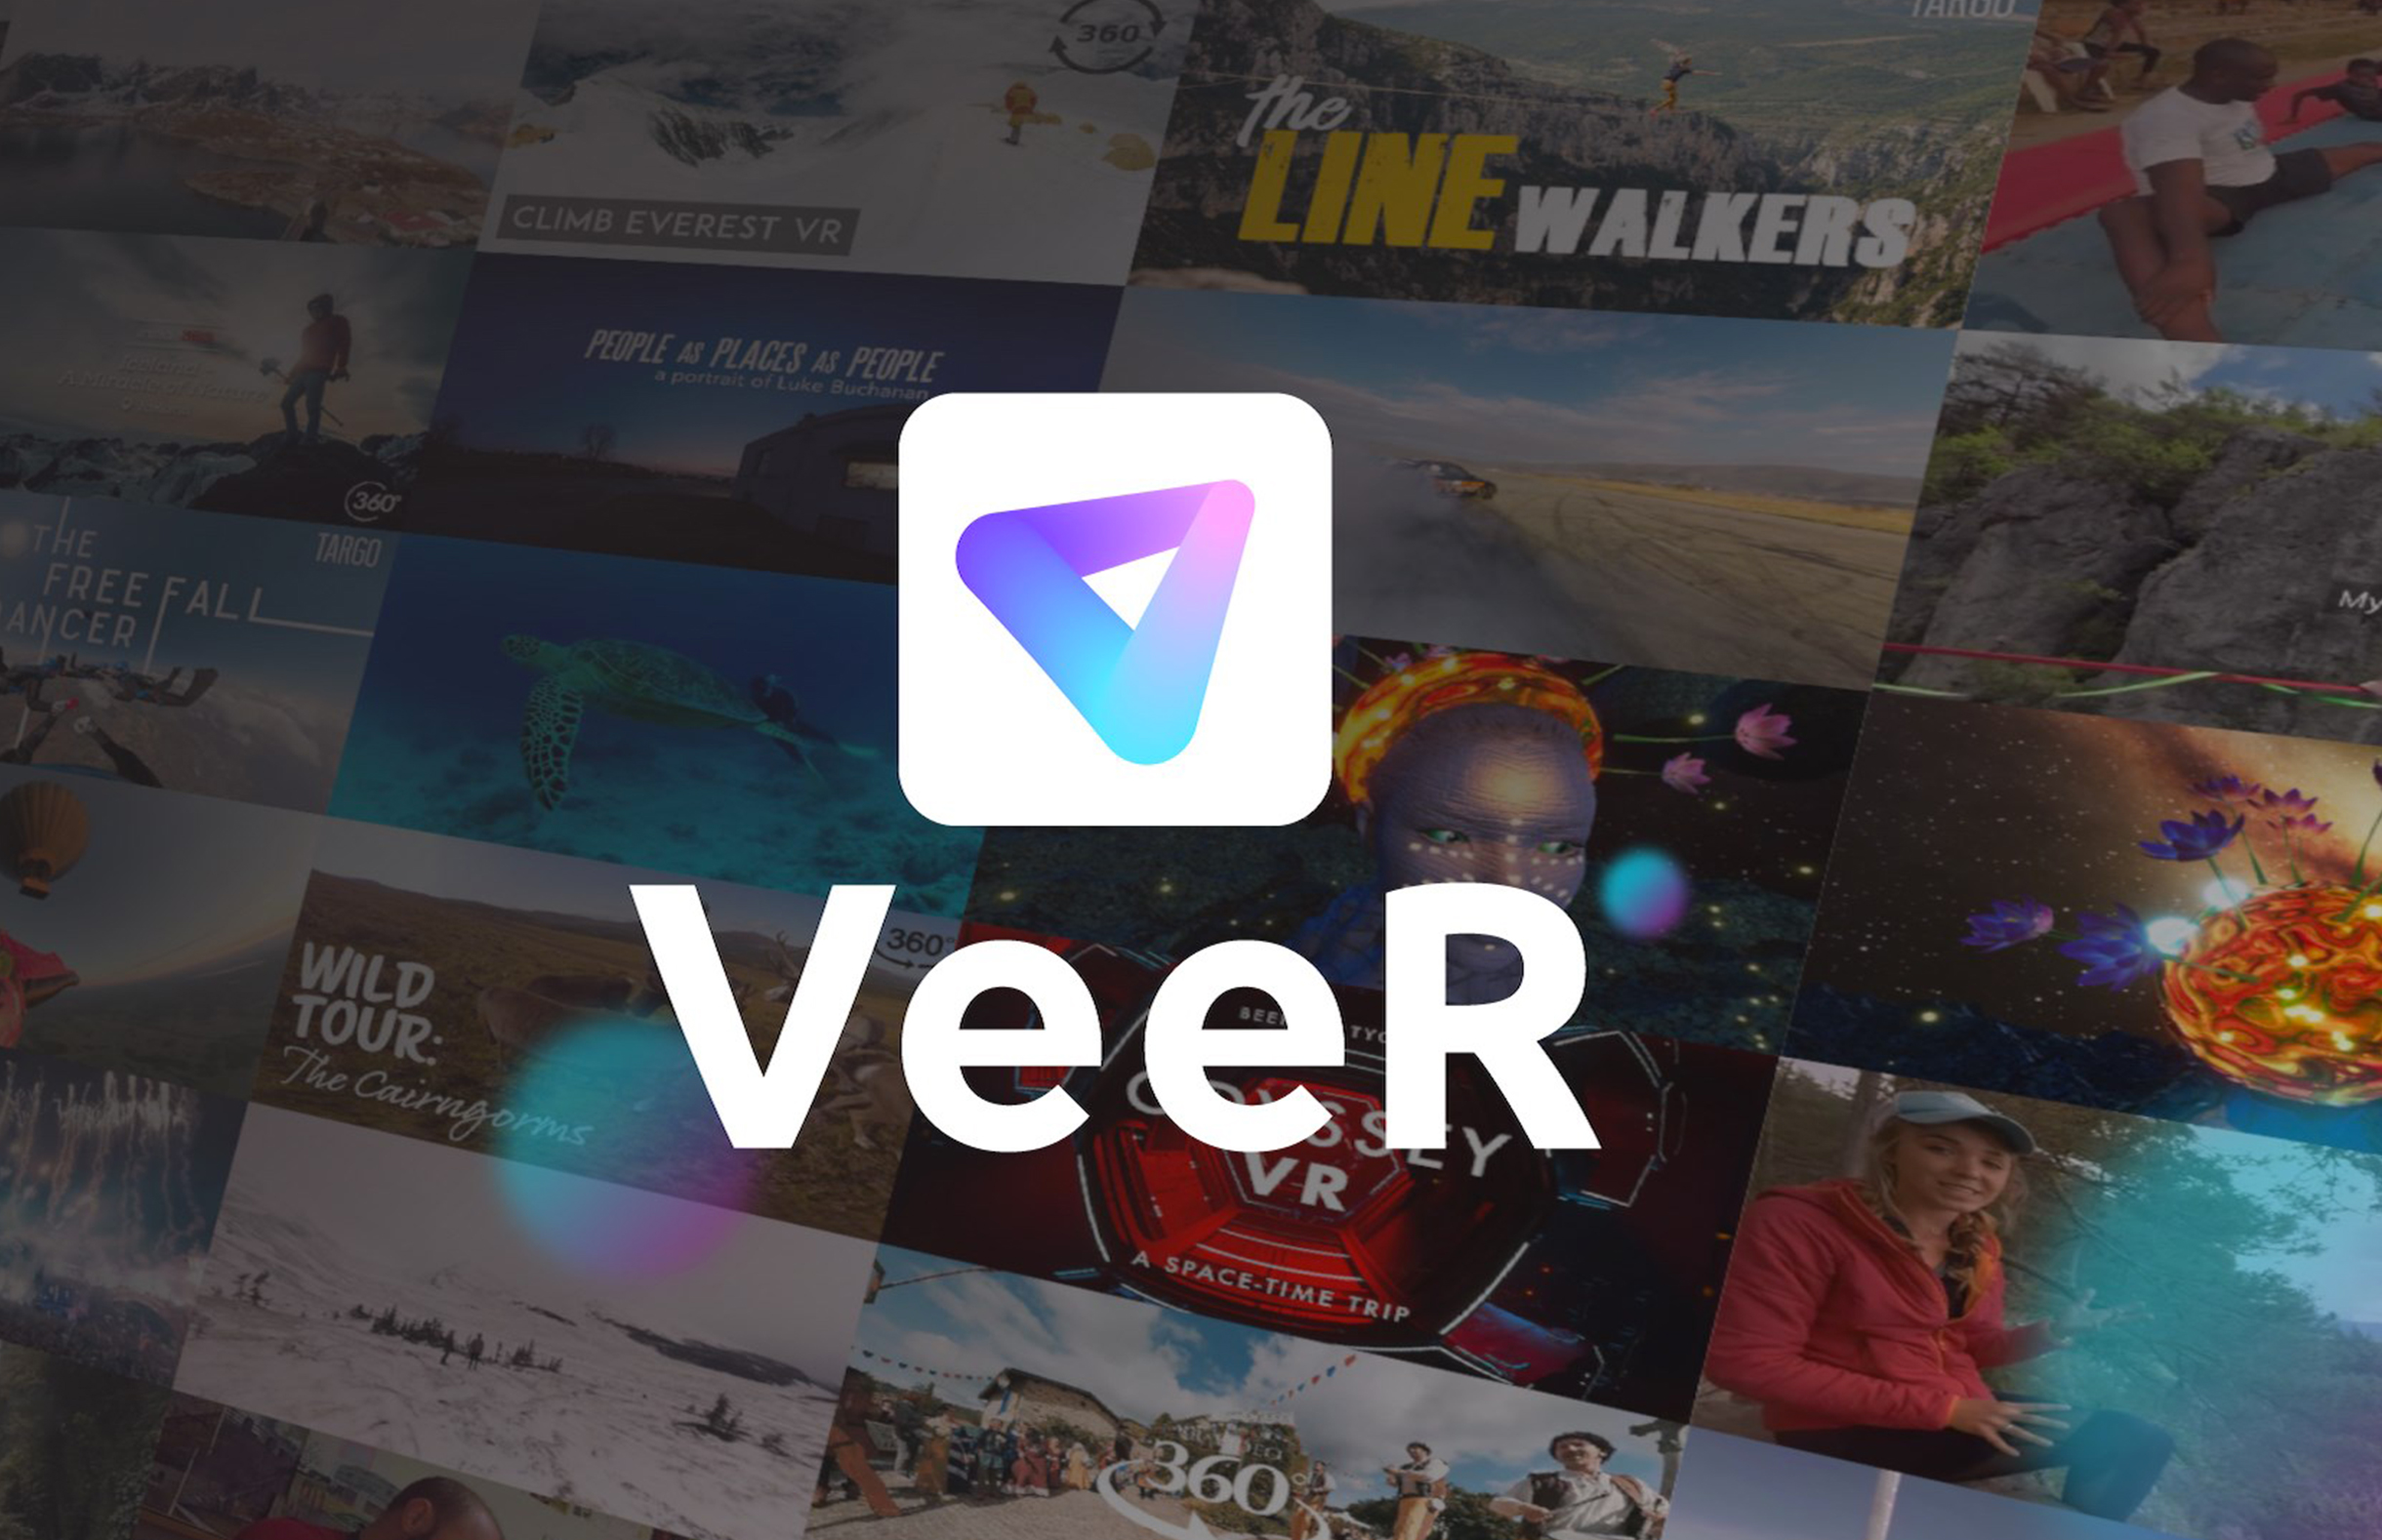 LR entered into a distribution agreement with VeeR